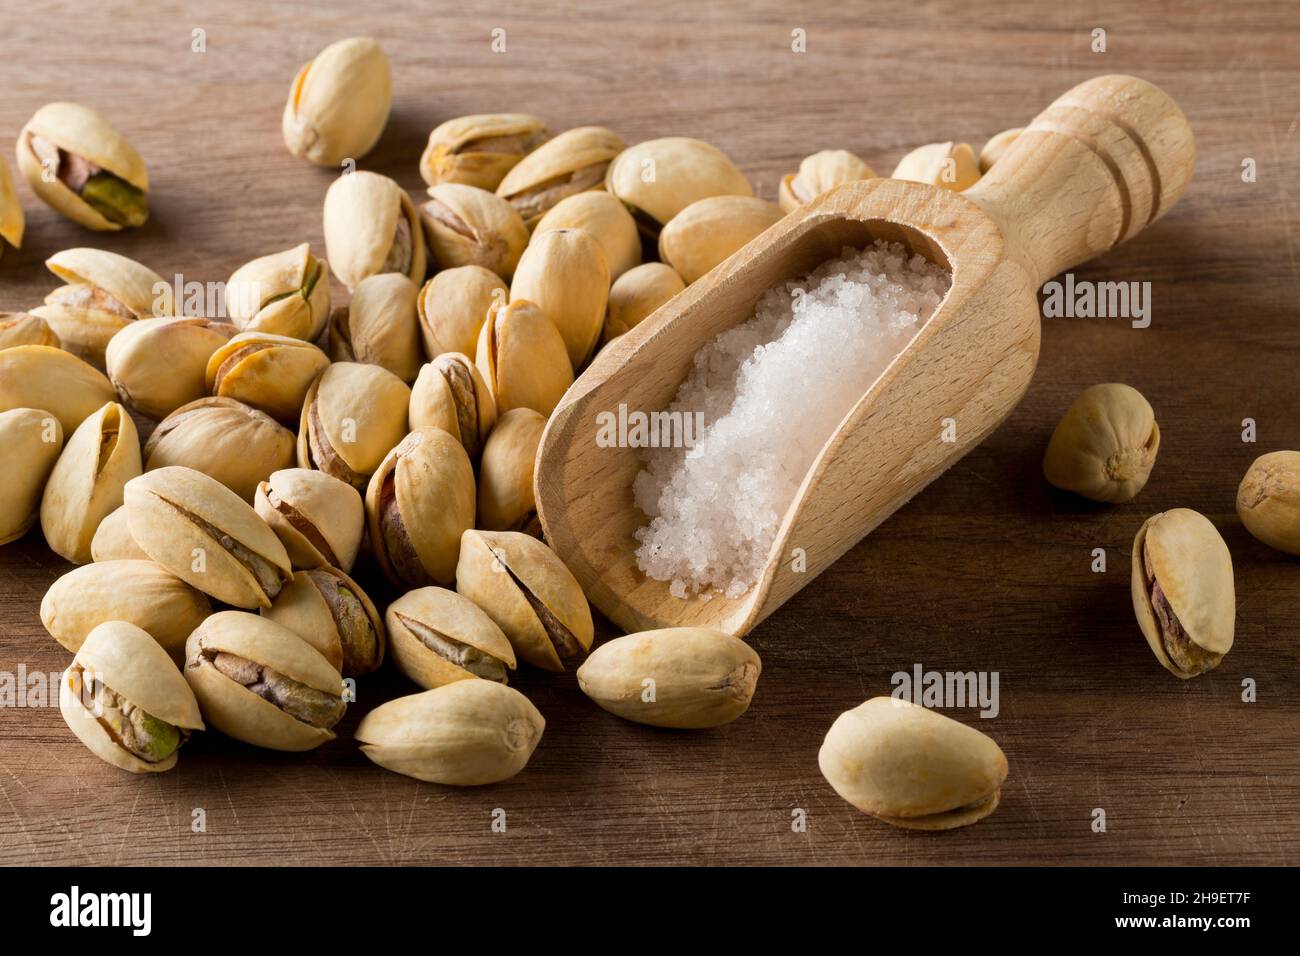 Heap of salted, roasted green pistachio nuts snack on wooden board background with sea salt in wooden scoop, healthy food snack, selective focus Stock Photo